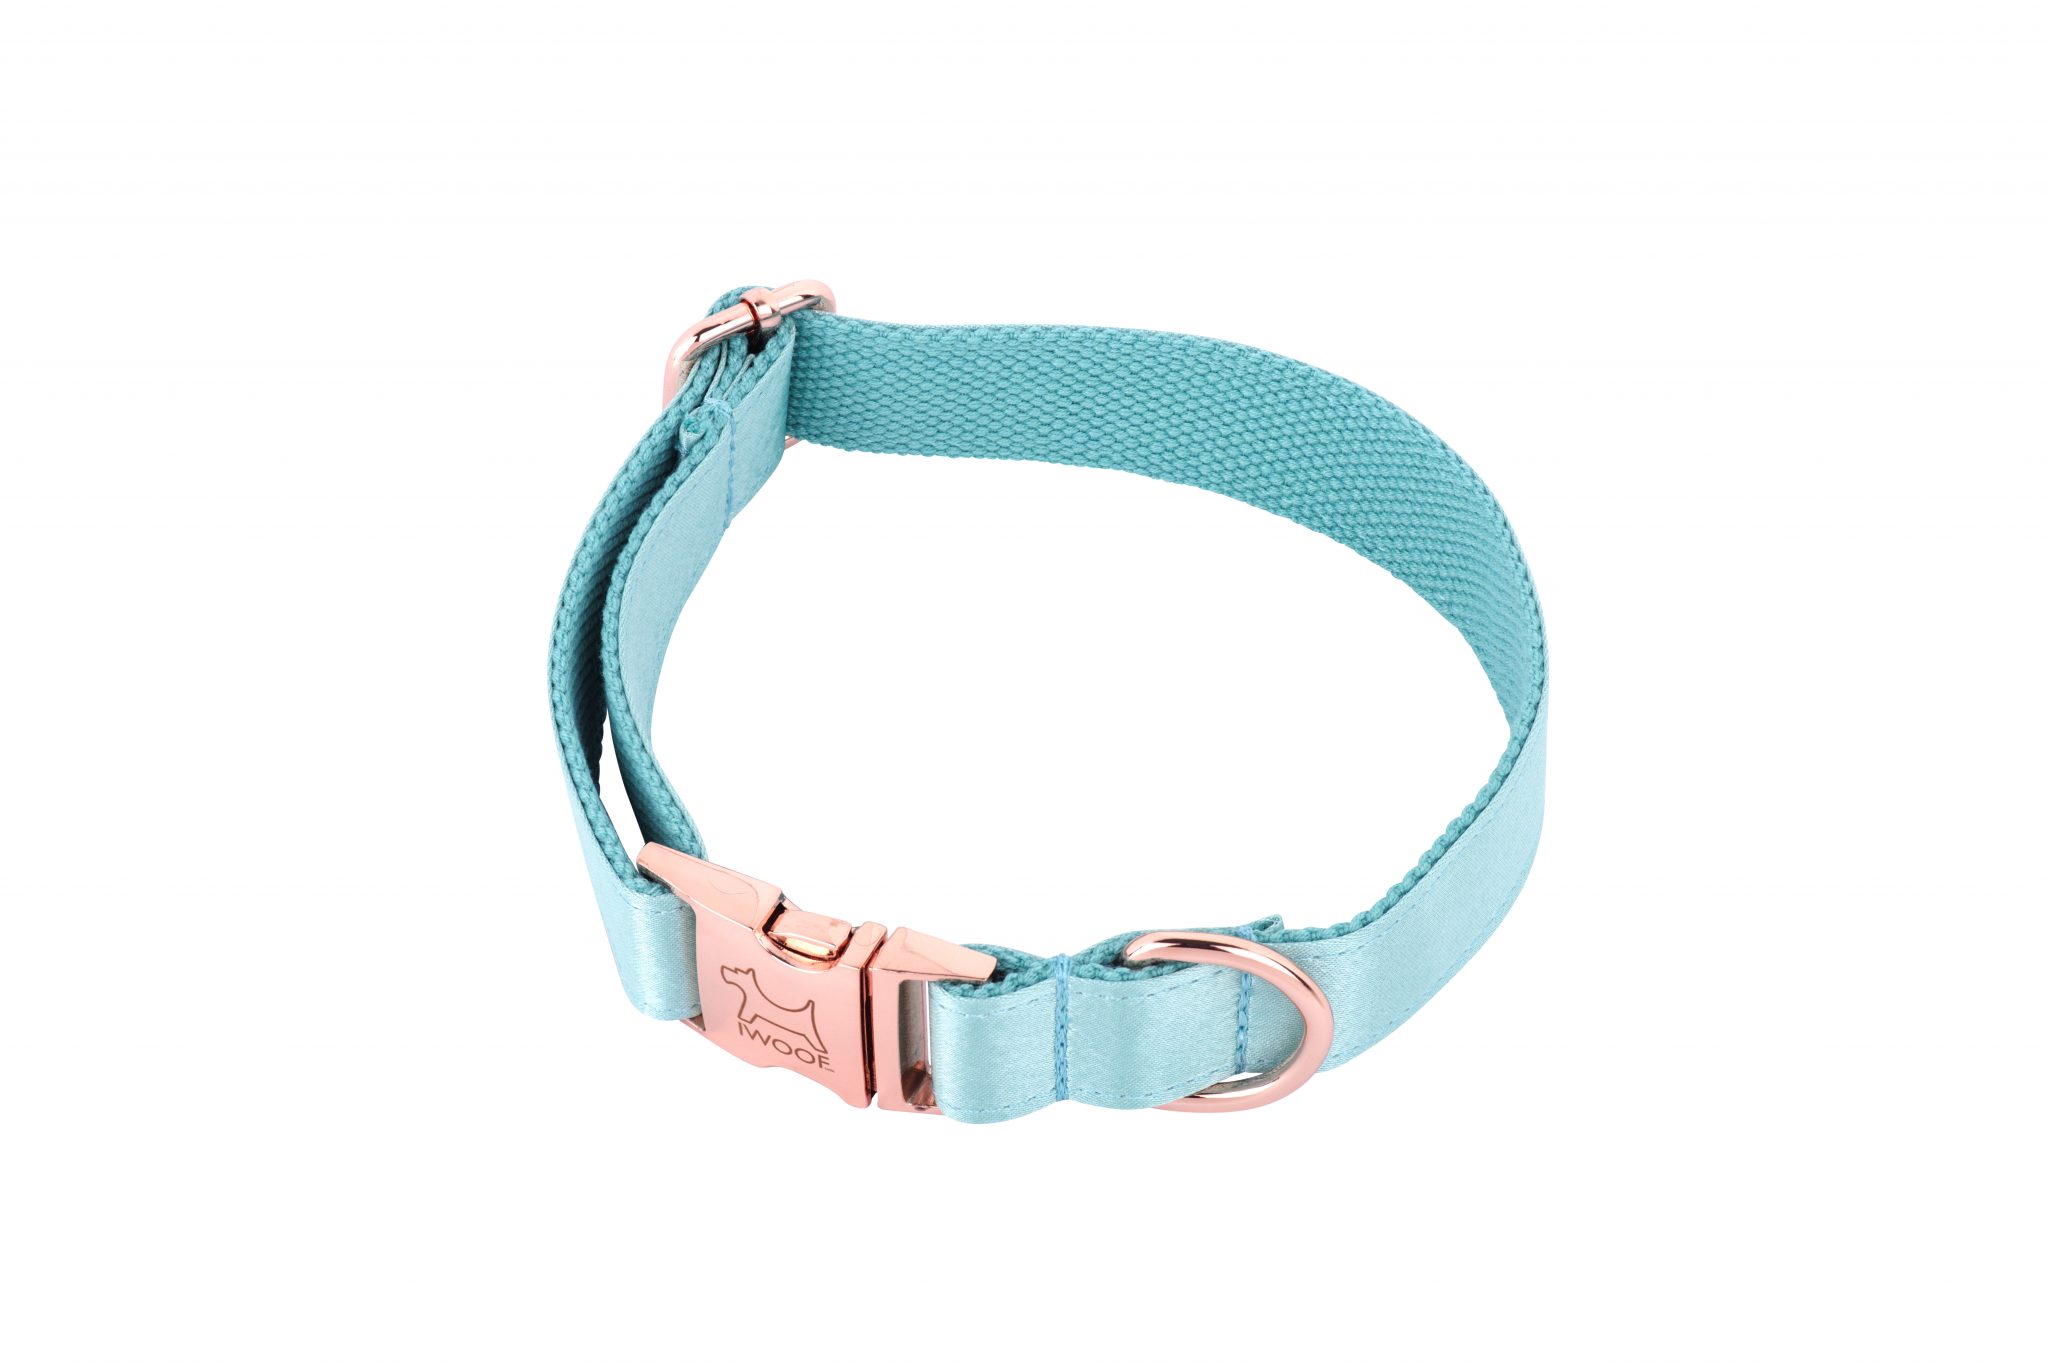 ACE Designer Dog Collar and Lead set in Rose Gold by IWOOF.com™ in ...